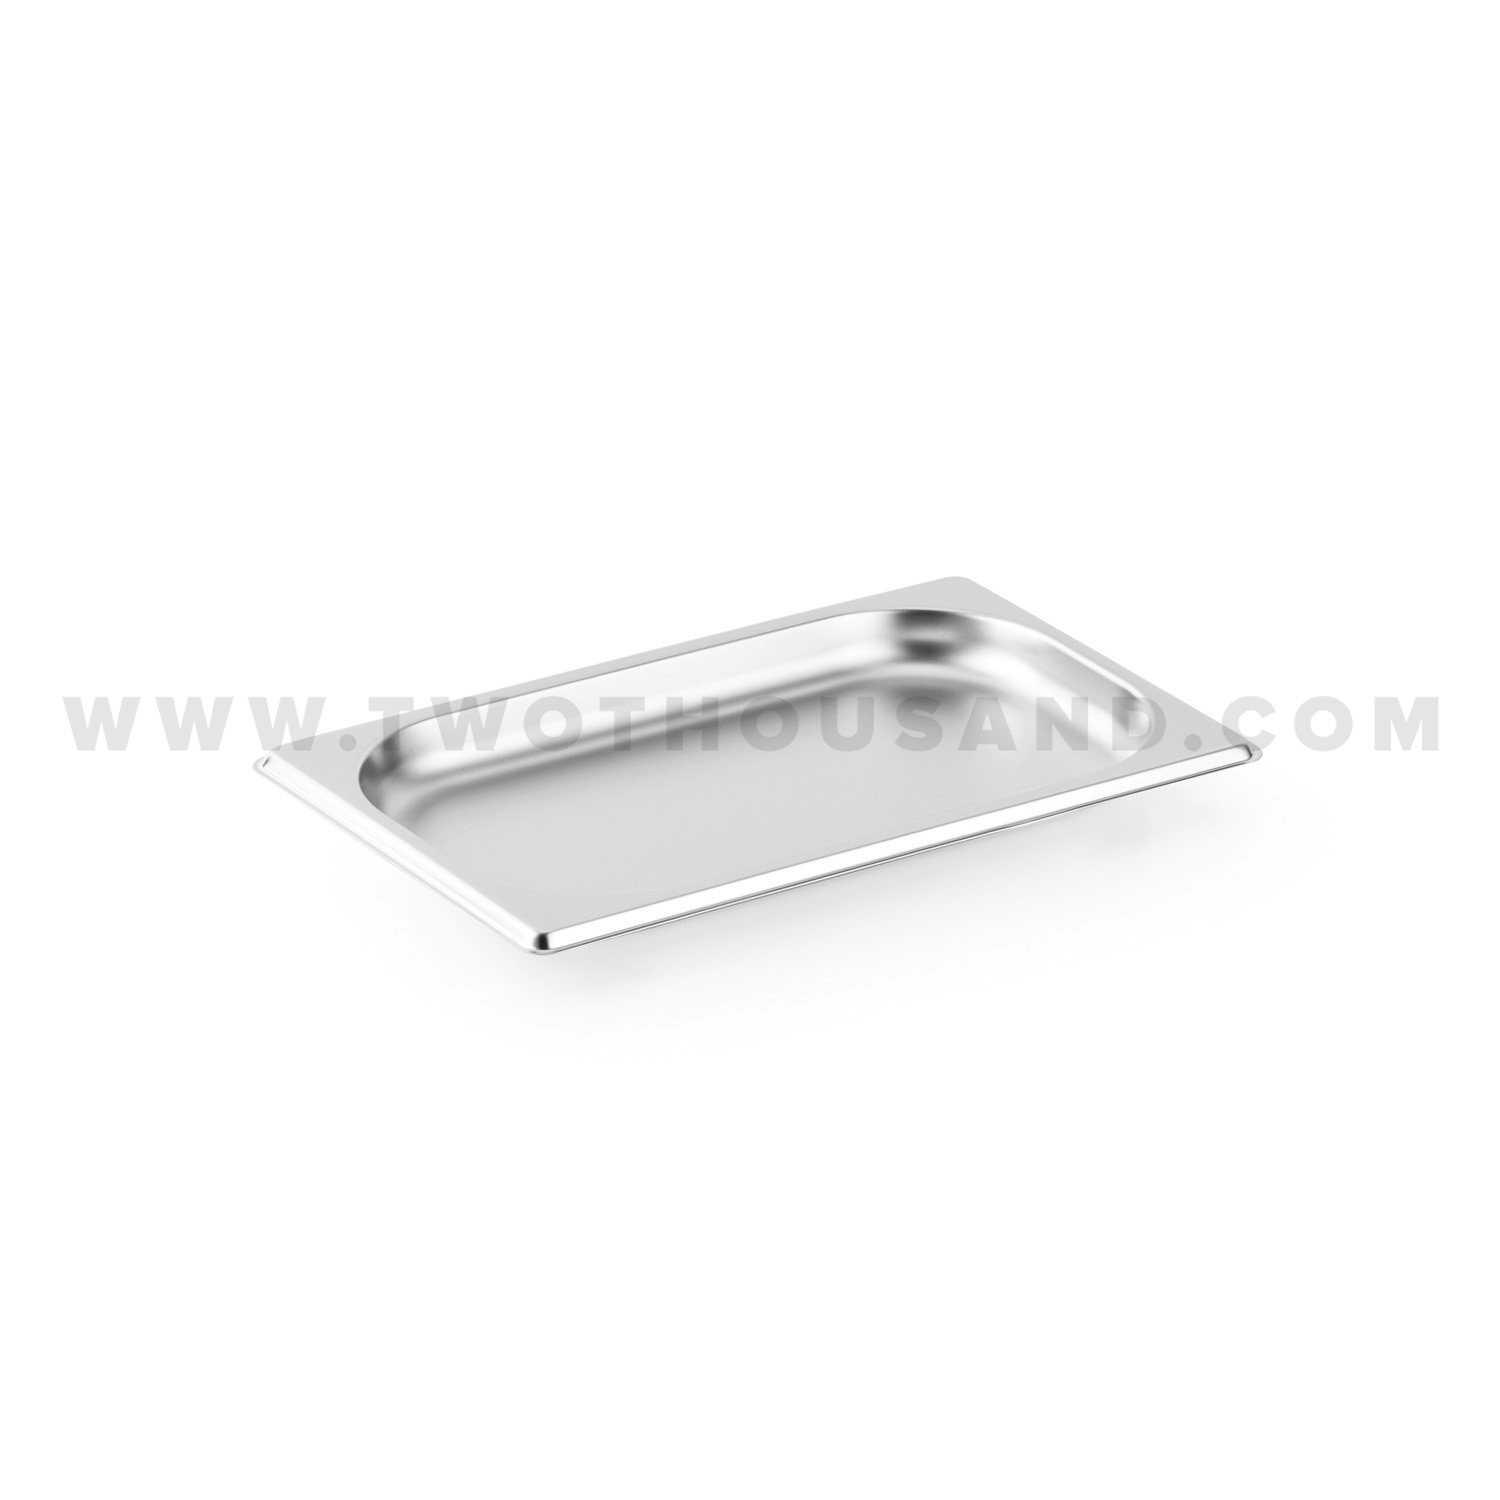 Stainless Steel Steam Table Pan TT-813-40 - Main View